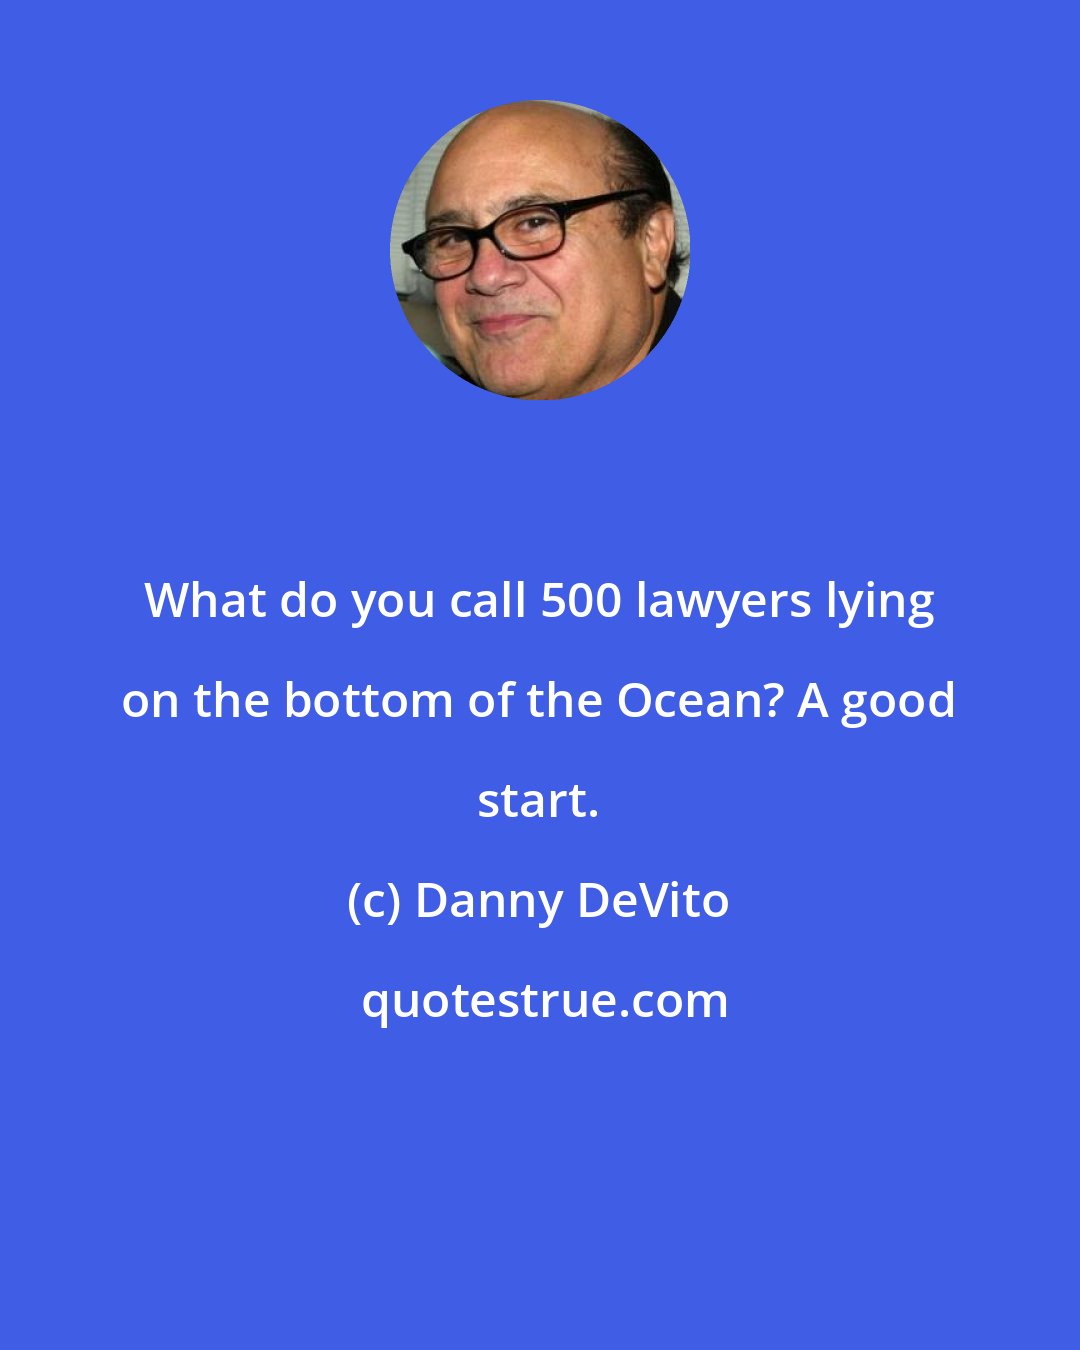 Danny DeVito: What do you call 500 lawyers lying on the bottom of the Ocean? A good start.